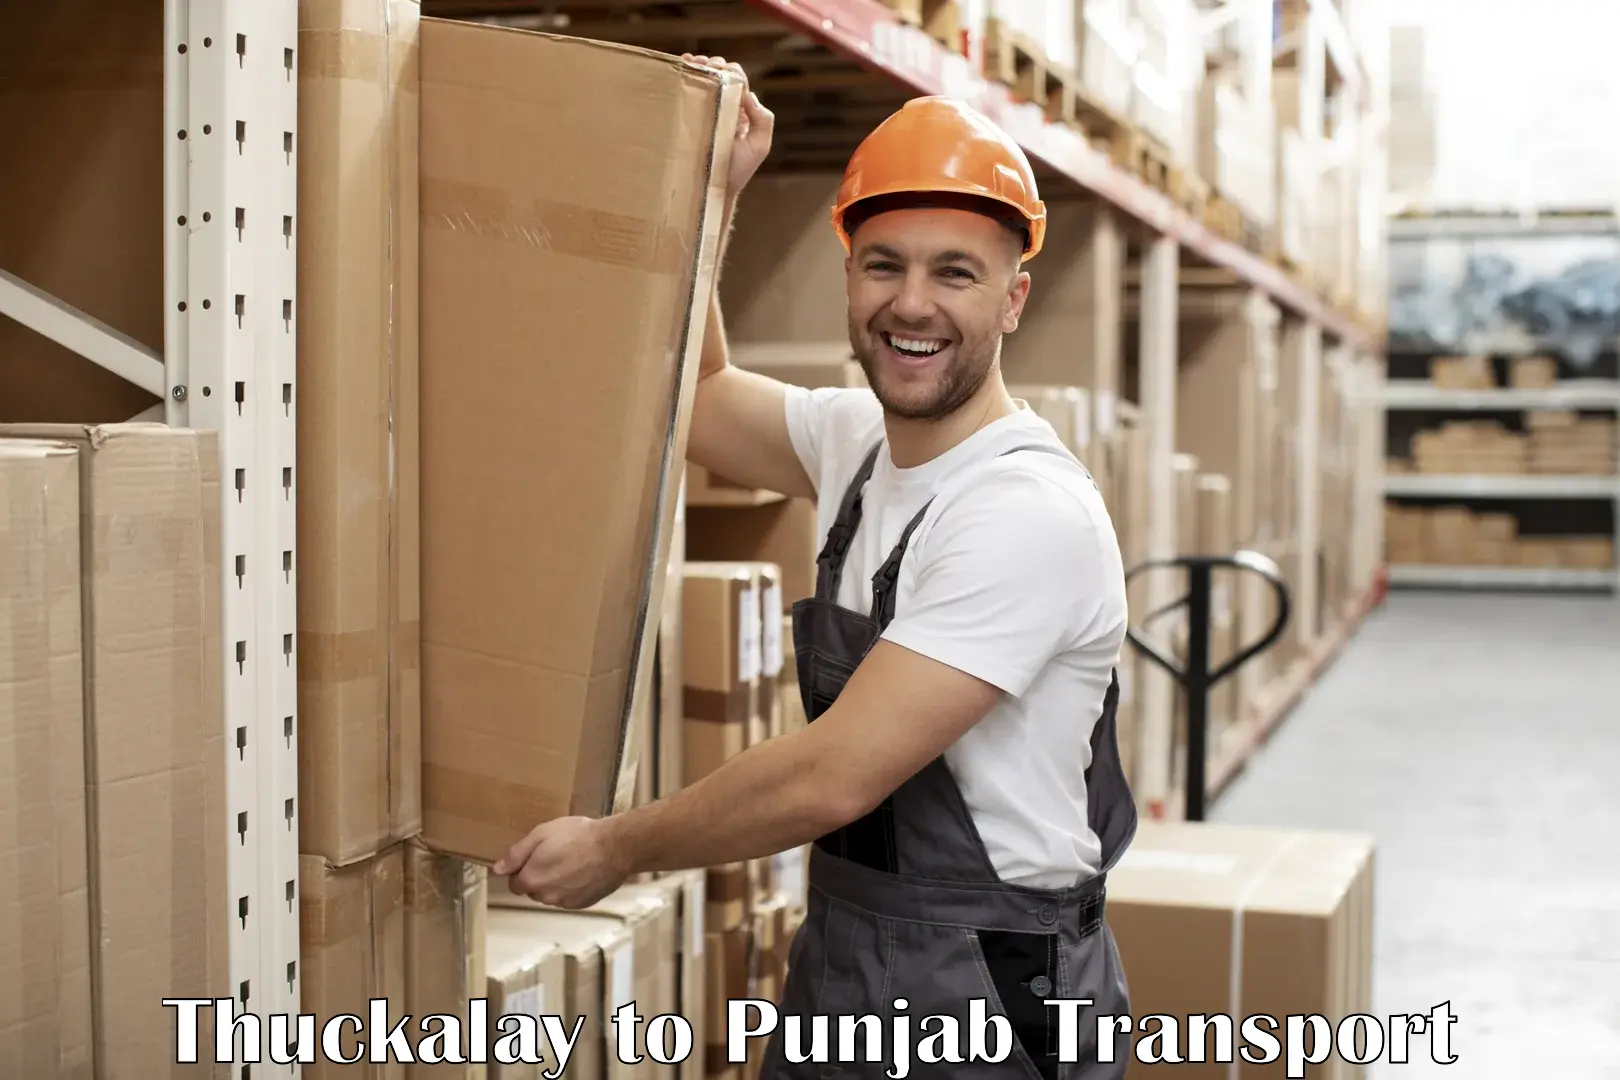 Nationwide transport services Thuckalay to Punjab